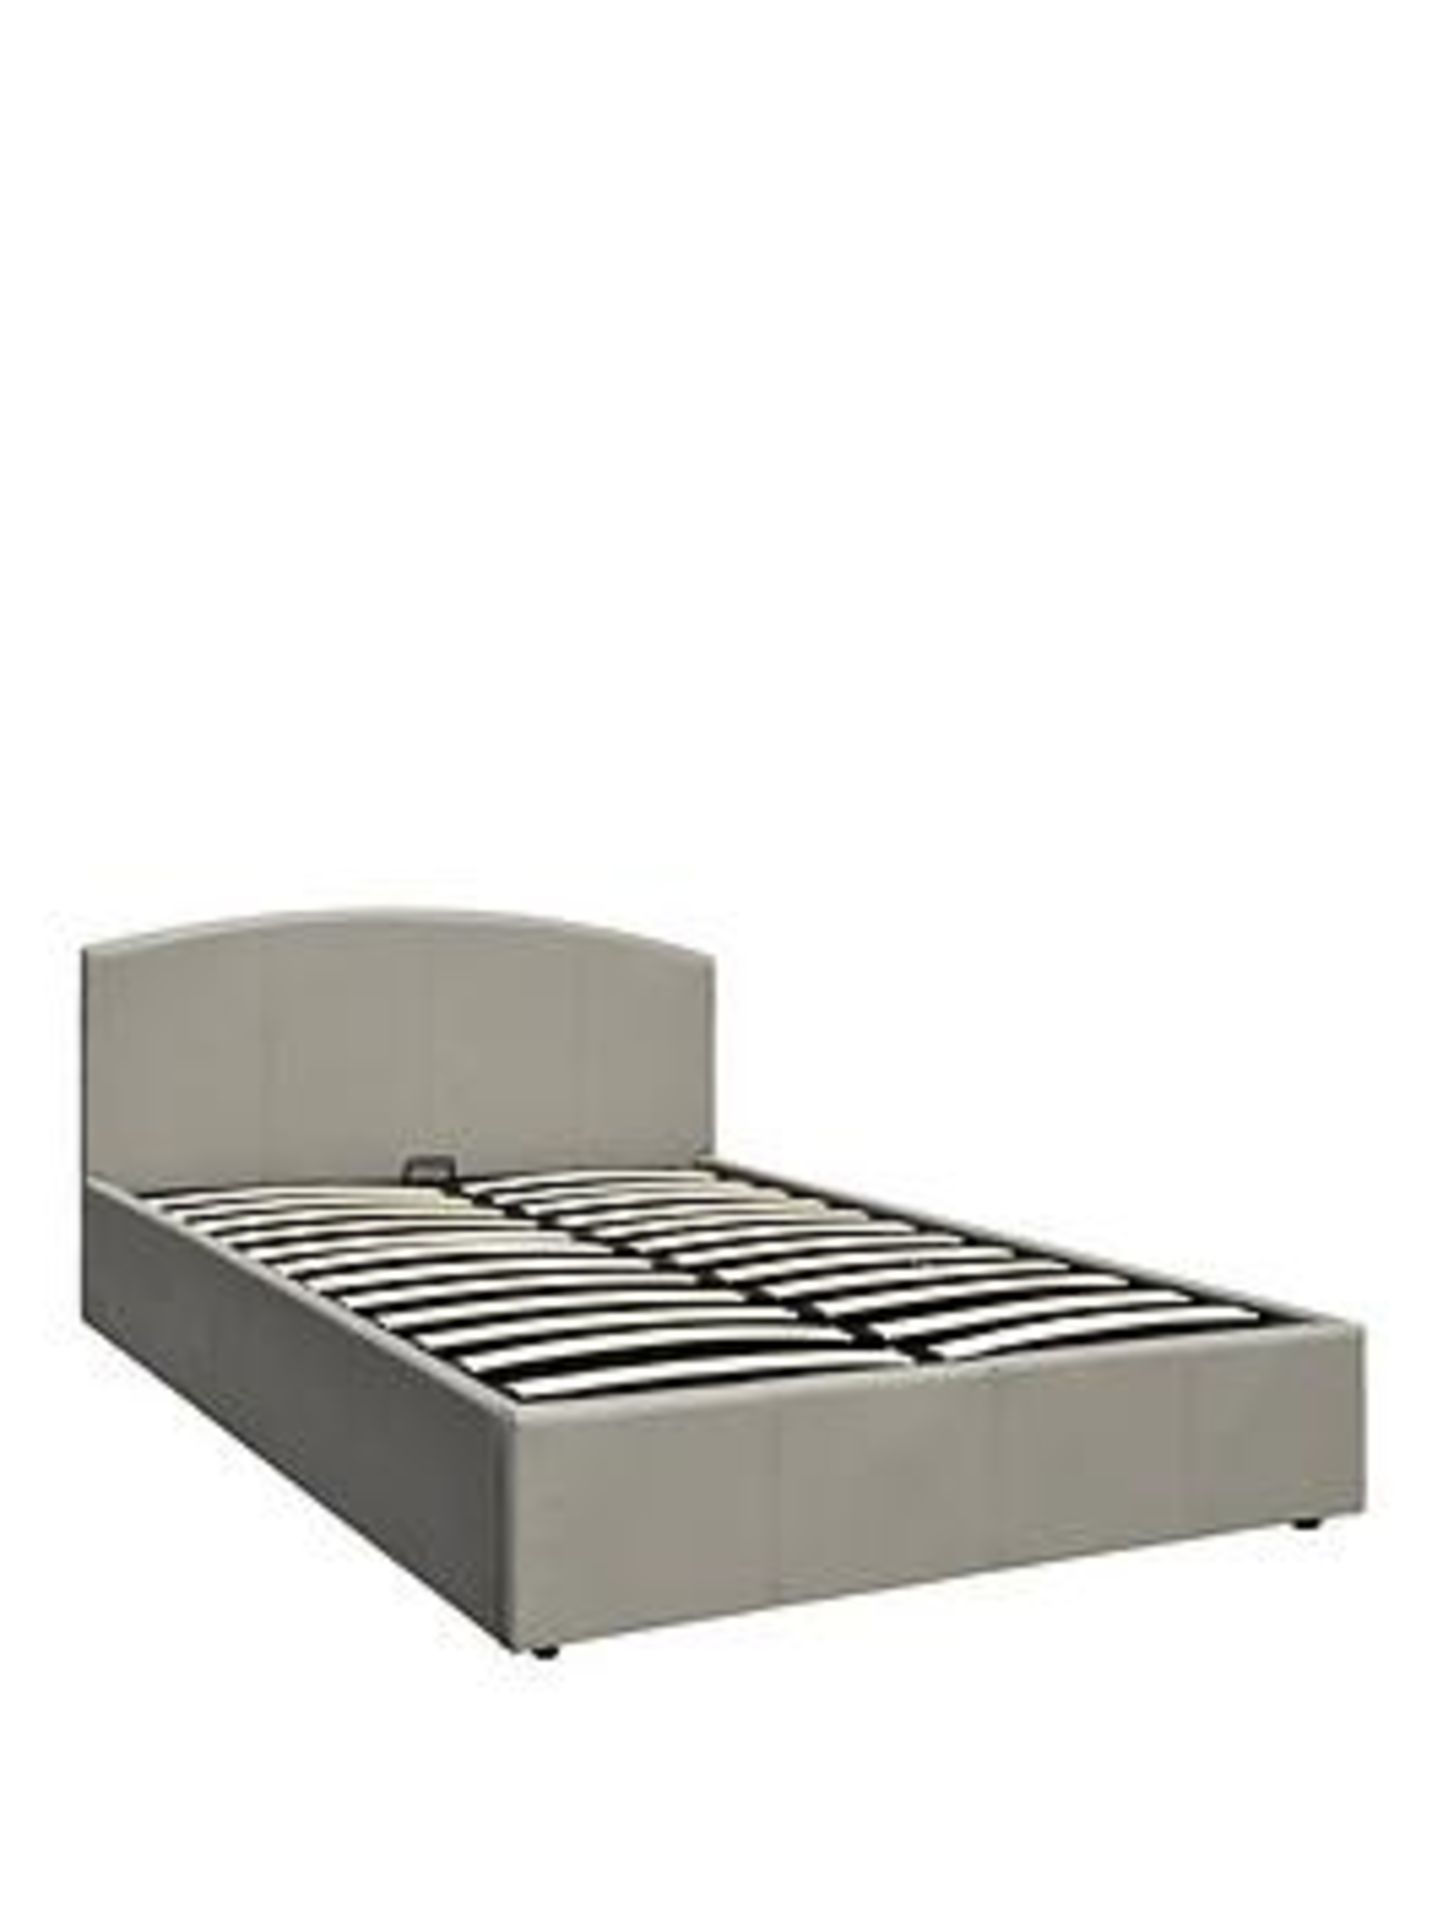 Boxed Item Marston Single Lift-Up Bed [Grey] 88X98X202Cm rrp, £430.0